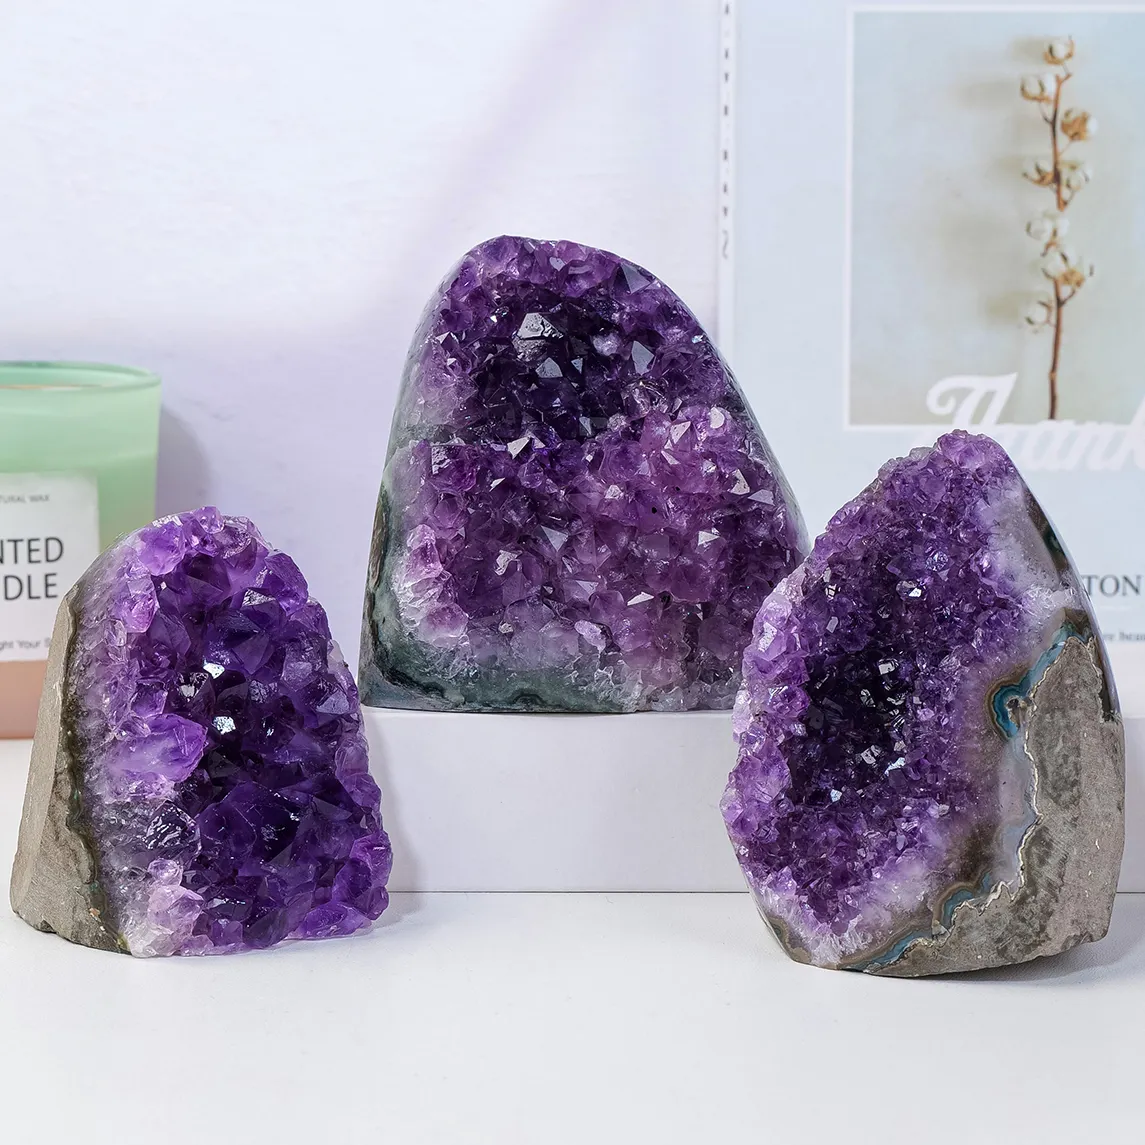 Wholesale Natural Healing Crystal Amethyst Cluster Crafts Carved Rough Crystal Geode For Decor